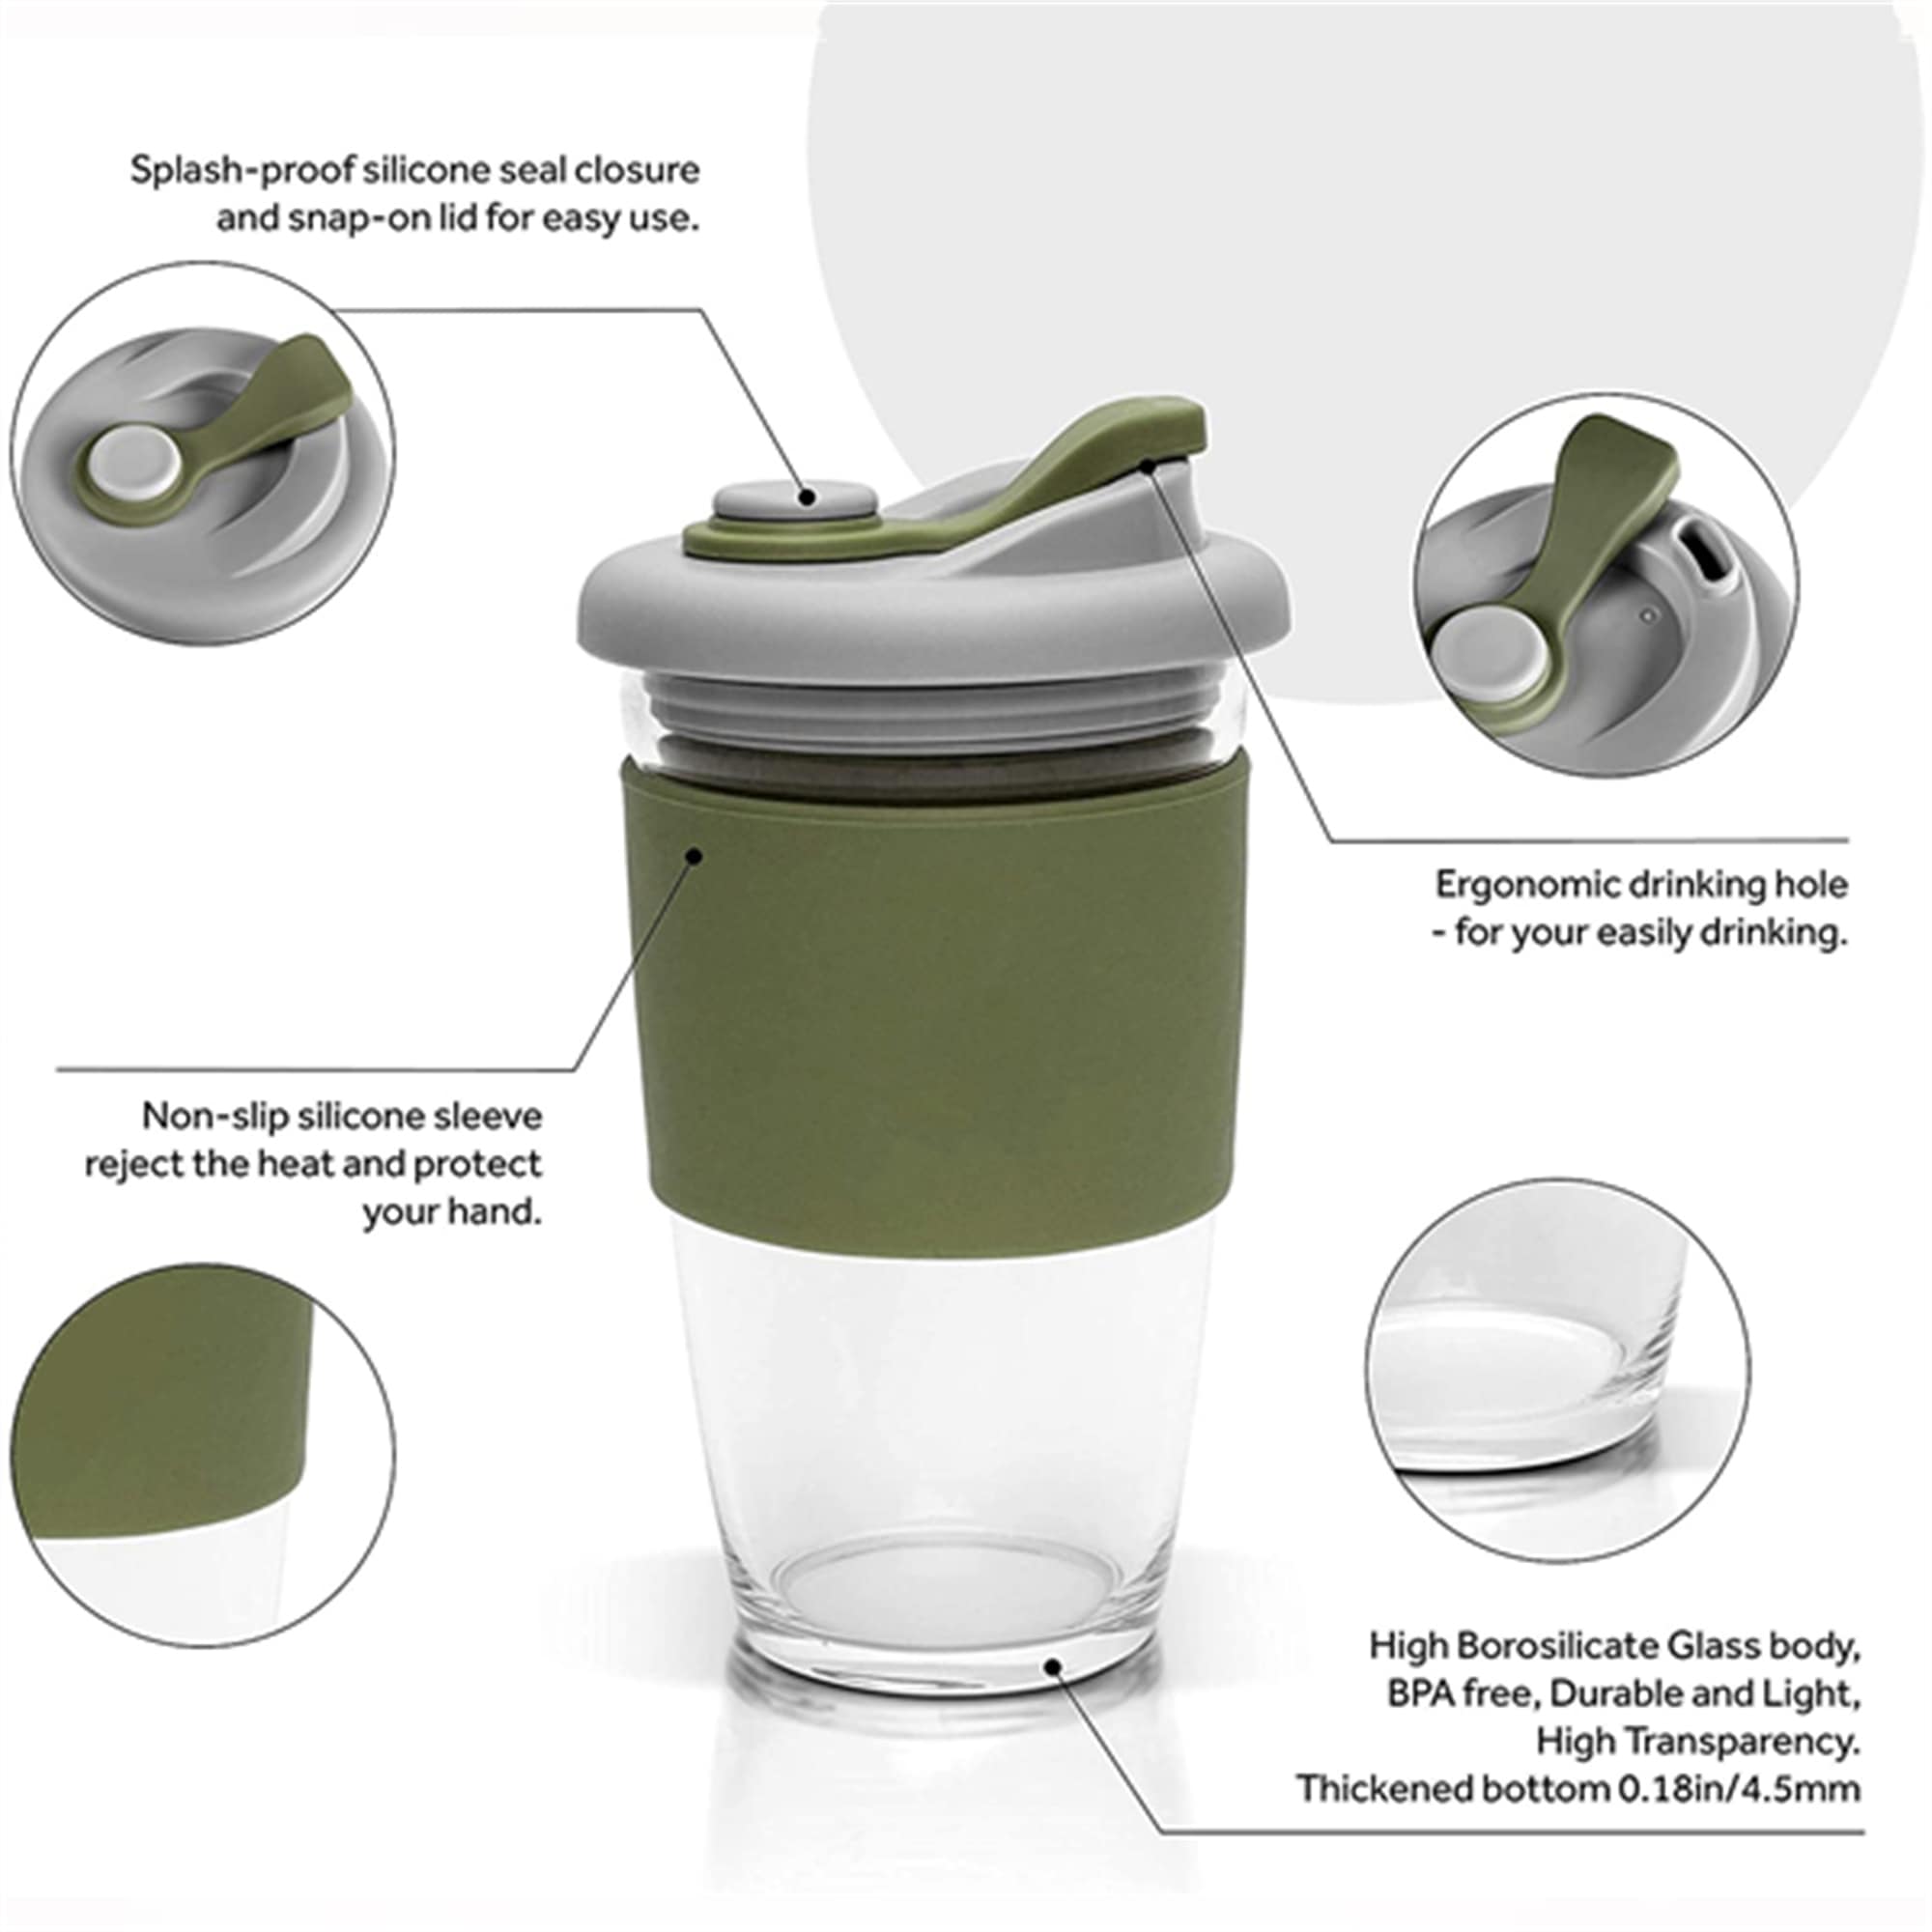 https://ak1.ostkcdn.com/images/products/is/images/direct/2b6513aa6975165b6e38f9267911756abc503641/The-Reusable-Glass-Coffee-Cup%2C-ToGo-Travel-Coffee-Mug-with-Lid-and-Silicone-Sleeve%2C-Dishwasher-and-Microwave-Safe.jpg